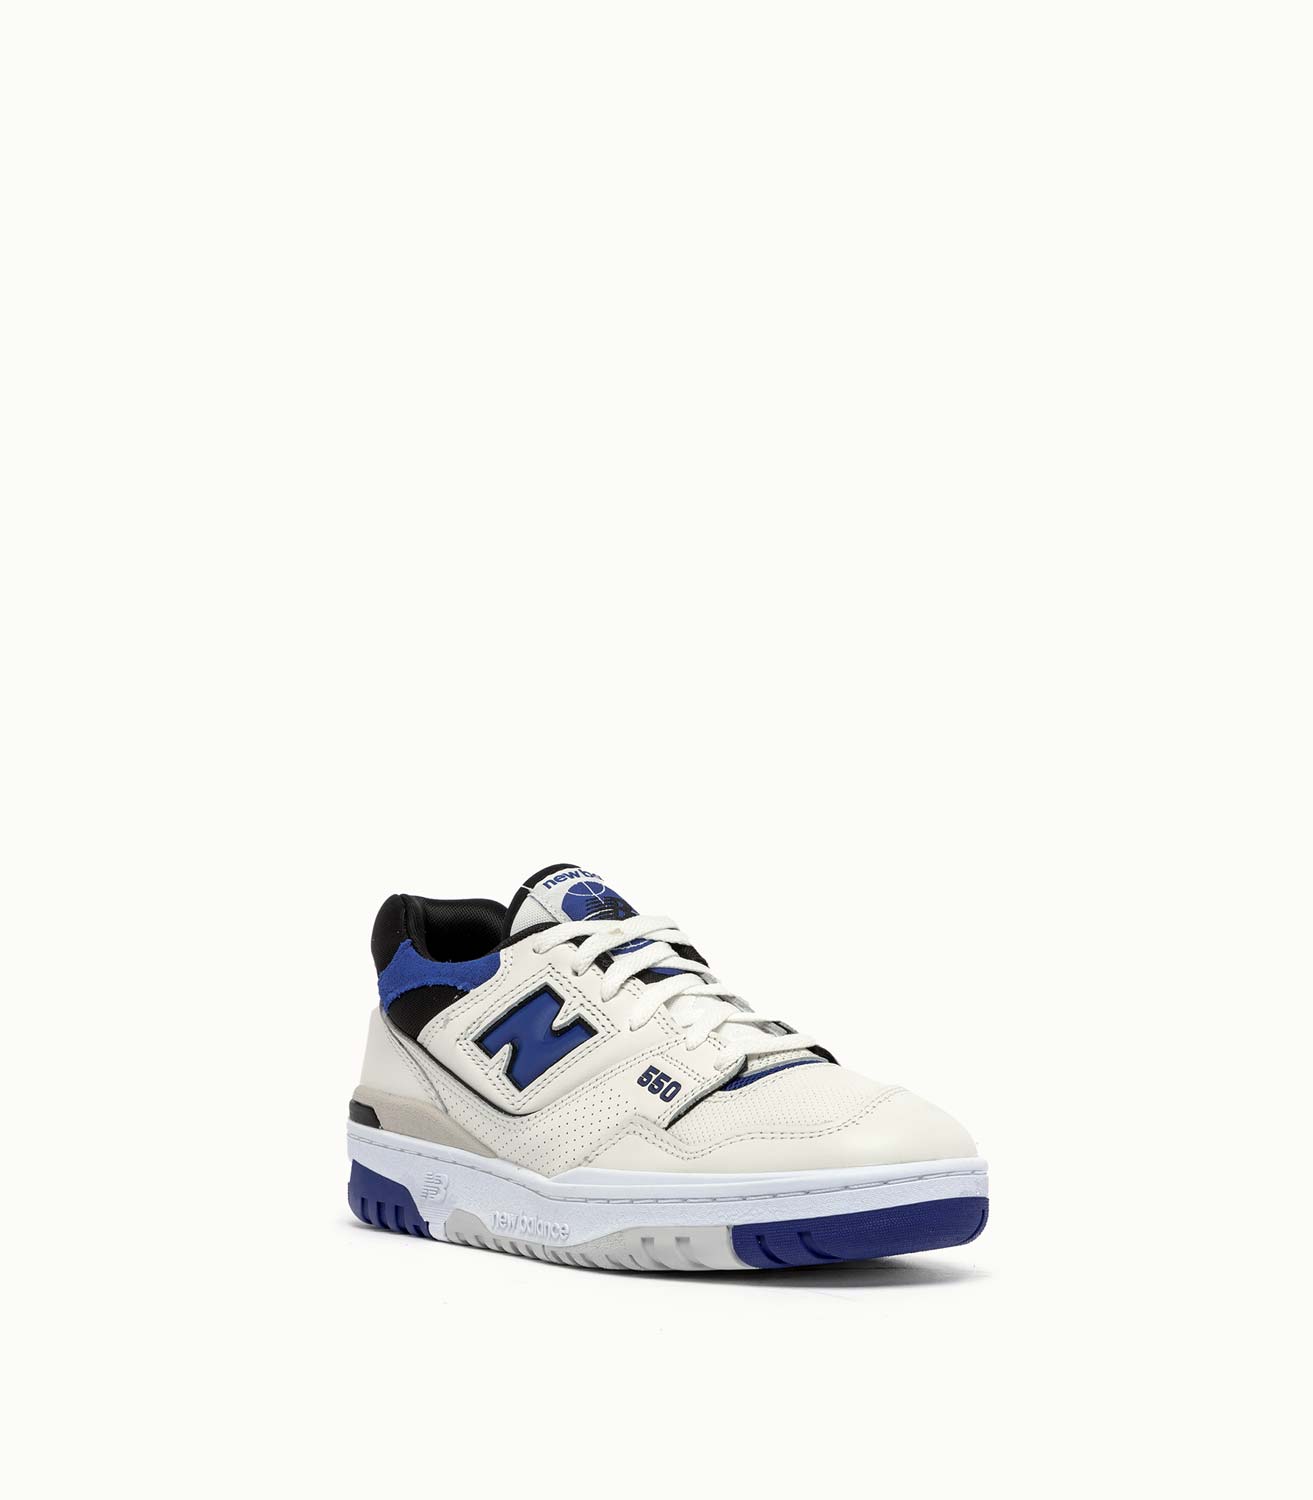 NEW BALANCE SNEAKERS COLOR WHITE BLUE Playground